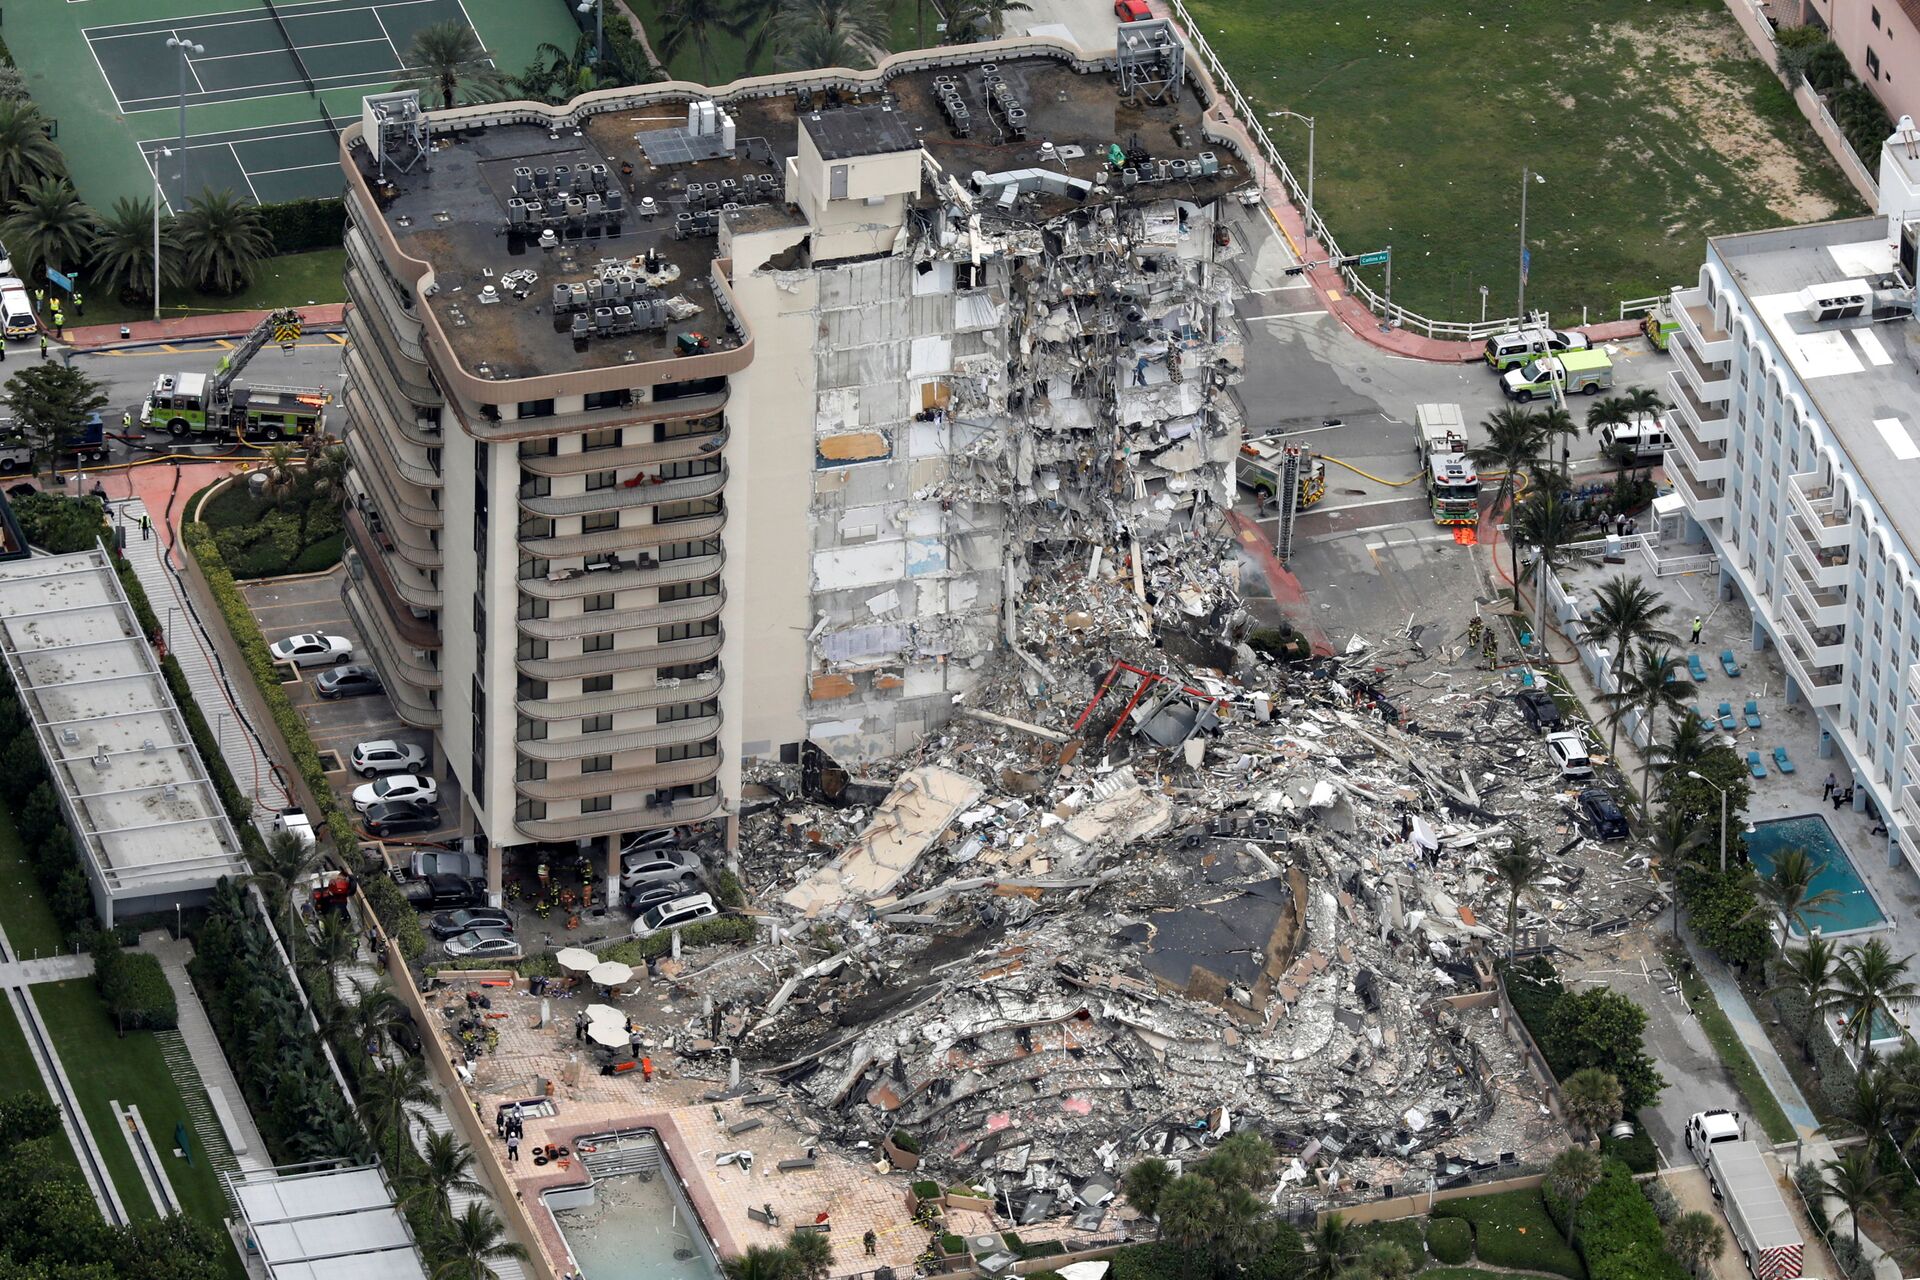 Death Toll From Miami Condo Collapse Rises to 11 as Rescue Efforts Go Into Fifth Day - Sputnik International, 1920, 28.06.2021